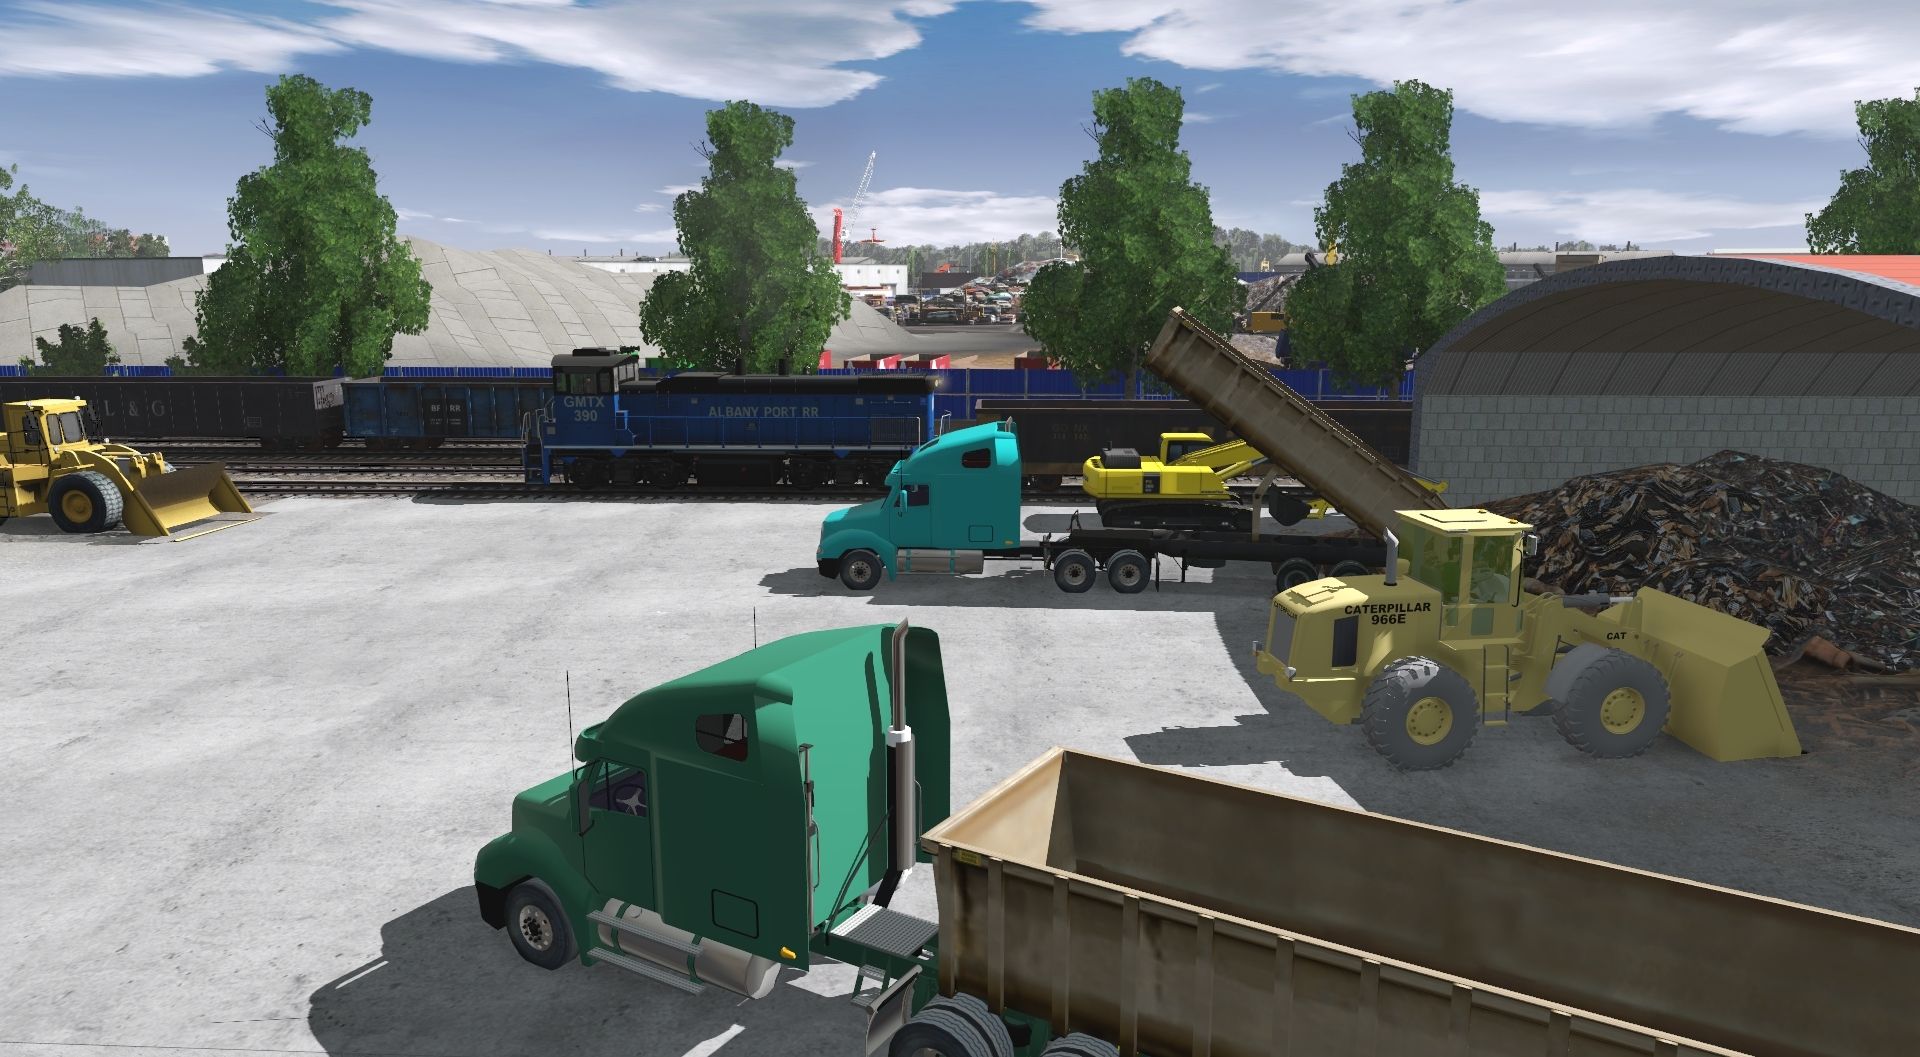 Working-the-transfer-tracks-at-Ben-Weitsman-Scrap-transfer-shed.jpg